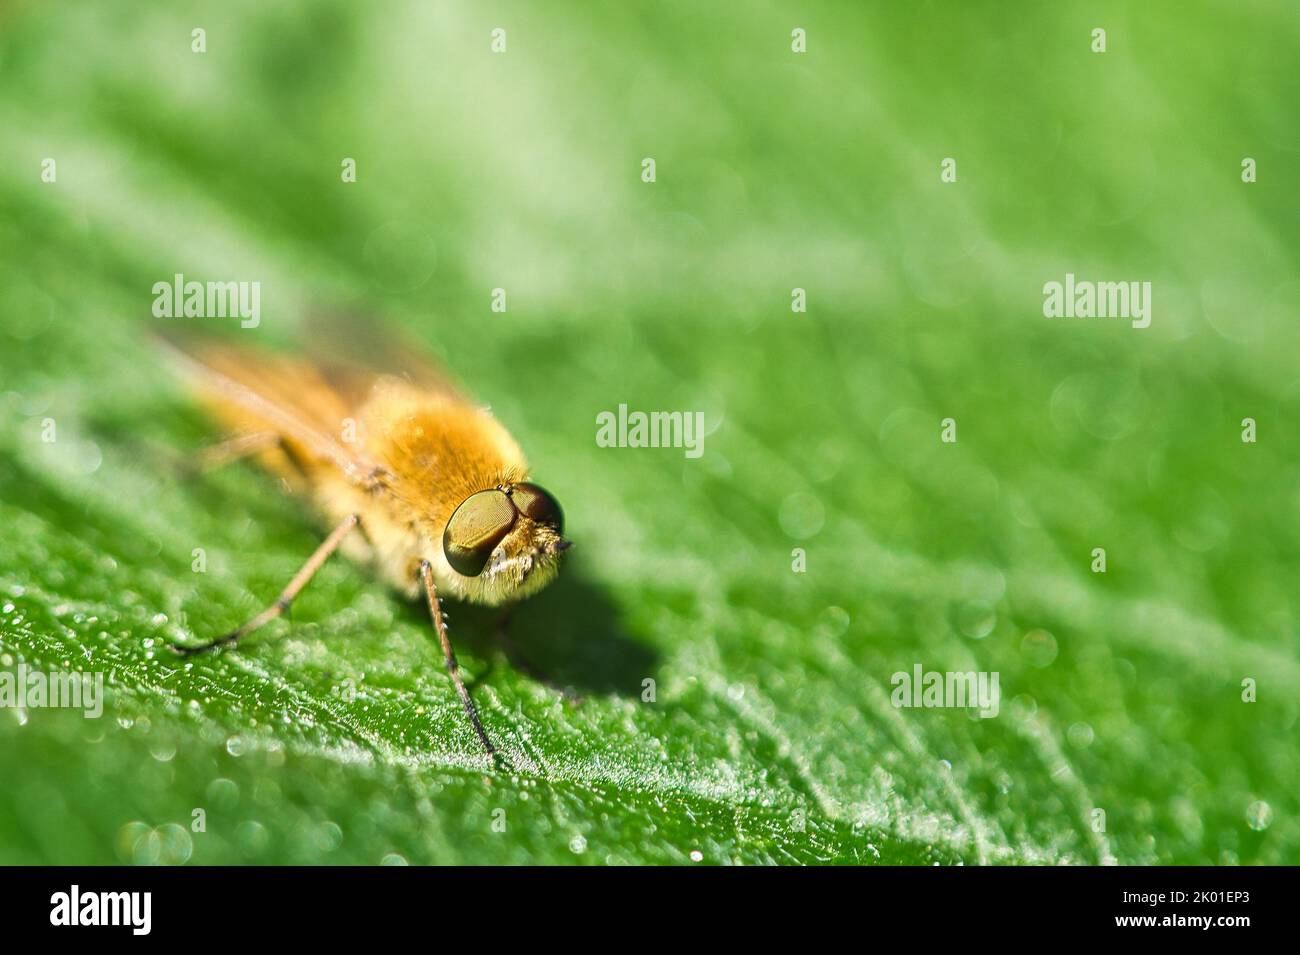 Hair rings fly on a green leaf. Sunshine on the insect. Macro shot of small animals Stock Photo